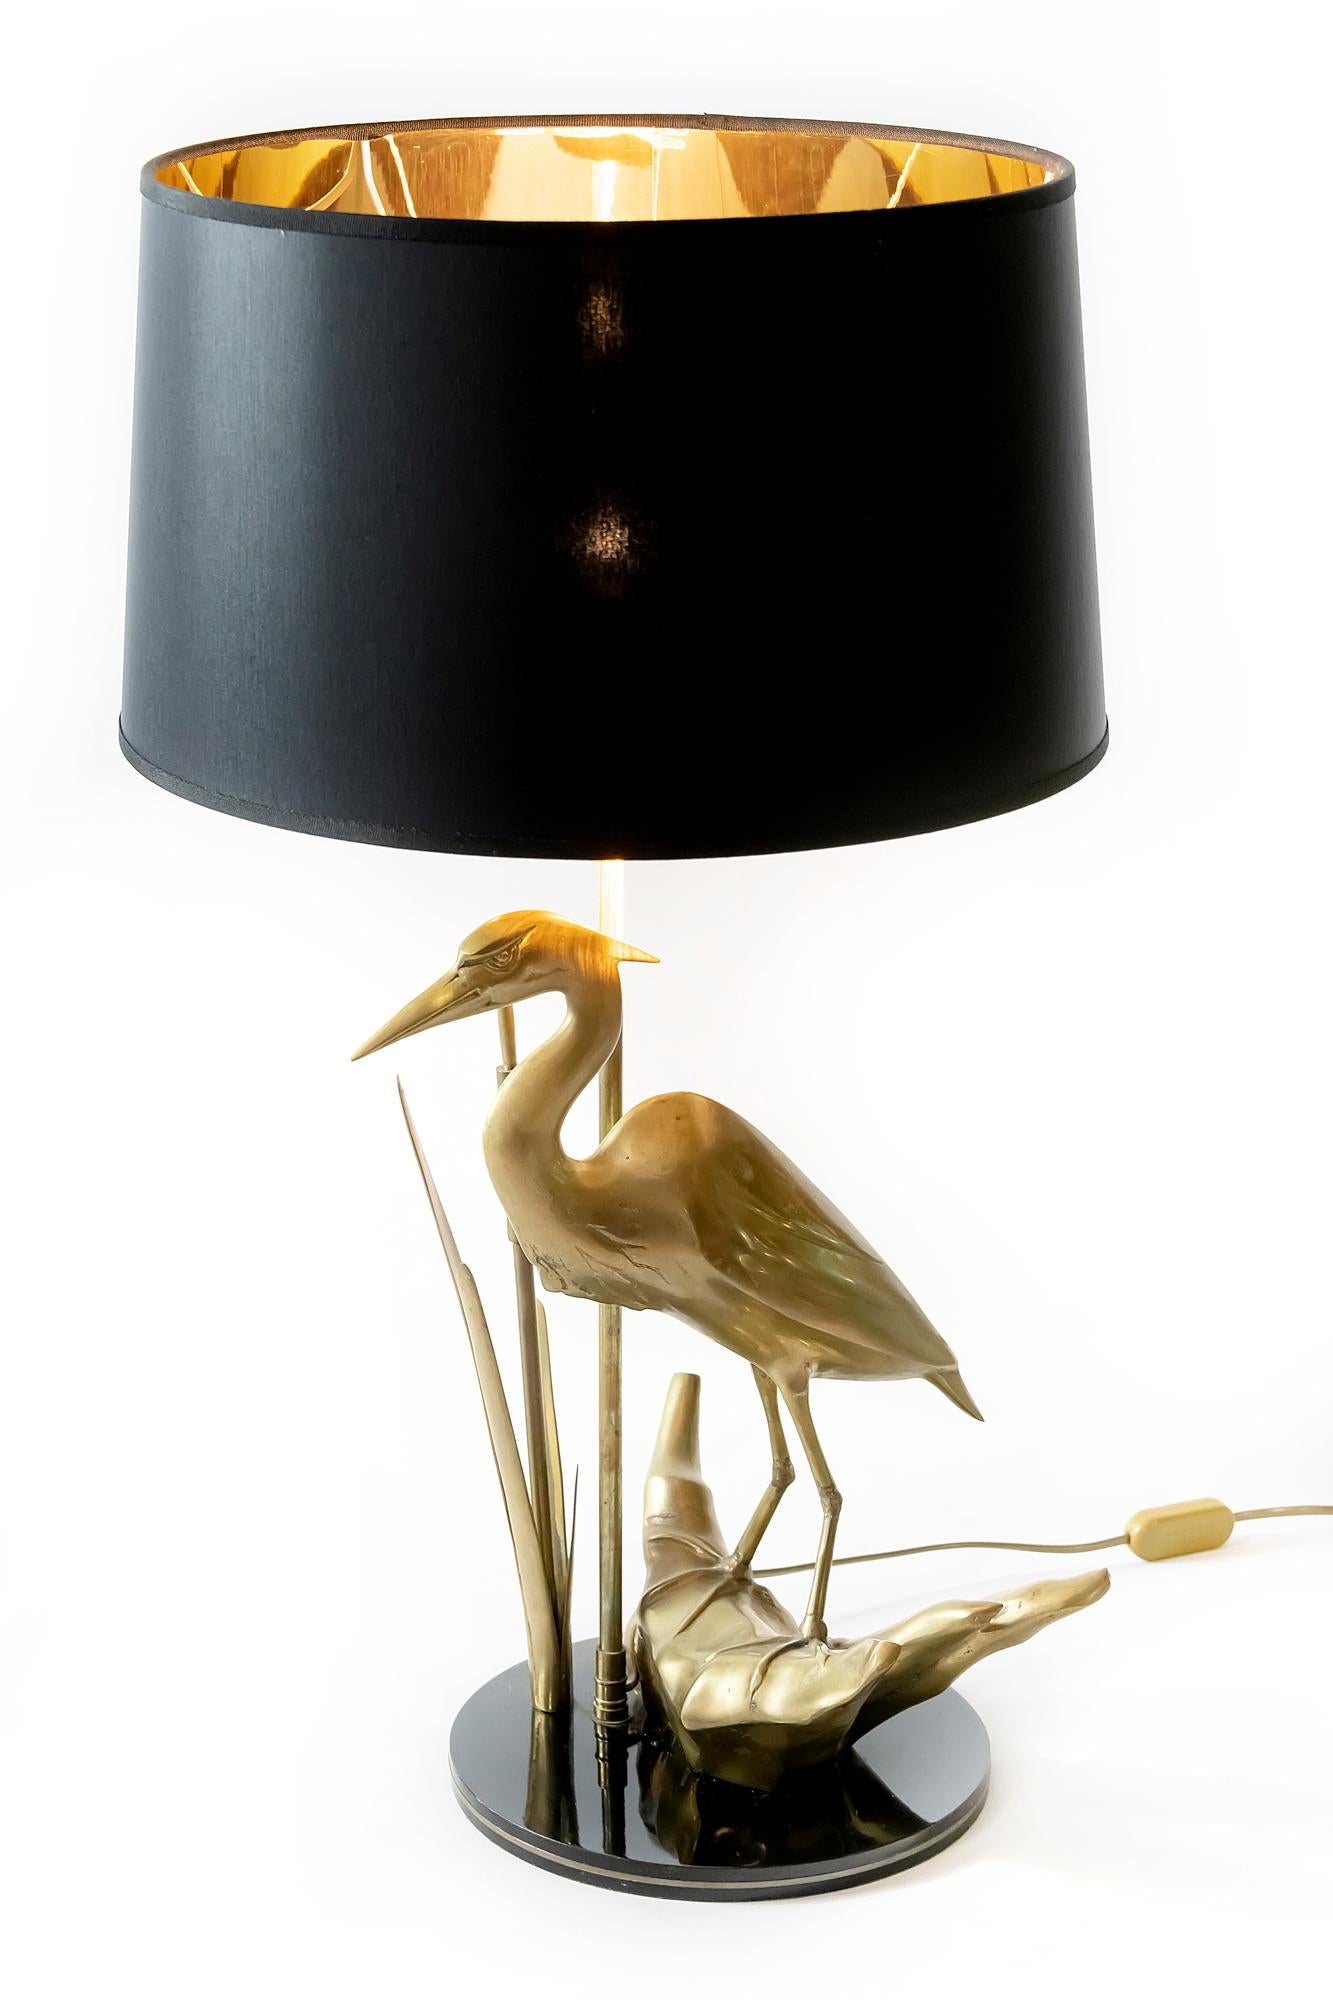 Vintage French table lamp with brass bird and floral elements on wooden base colored with glossy black colour, by Maison Charles.
Lamp is with the new made black color textile shade with gold inside.
Lamp includes E27 bulb.
 